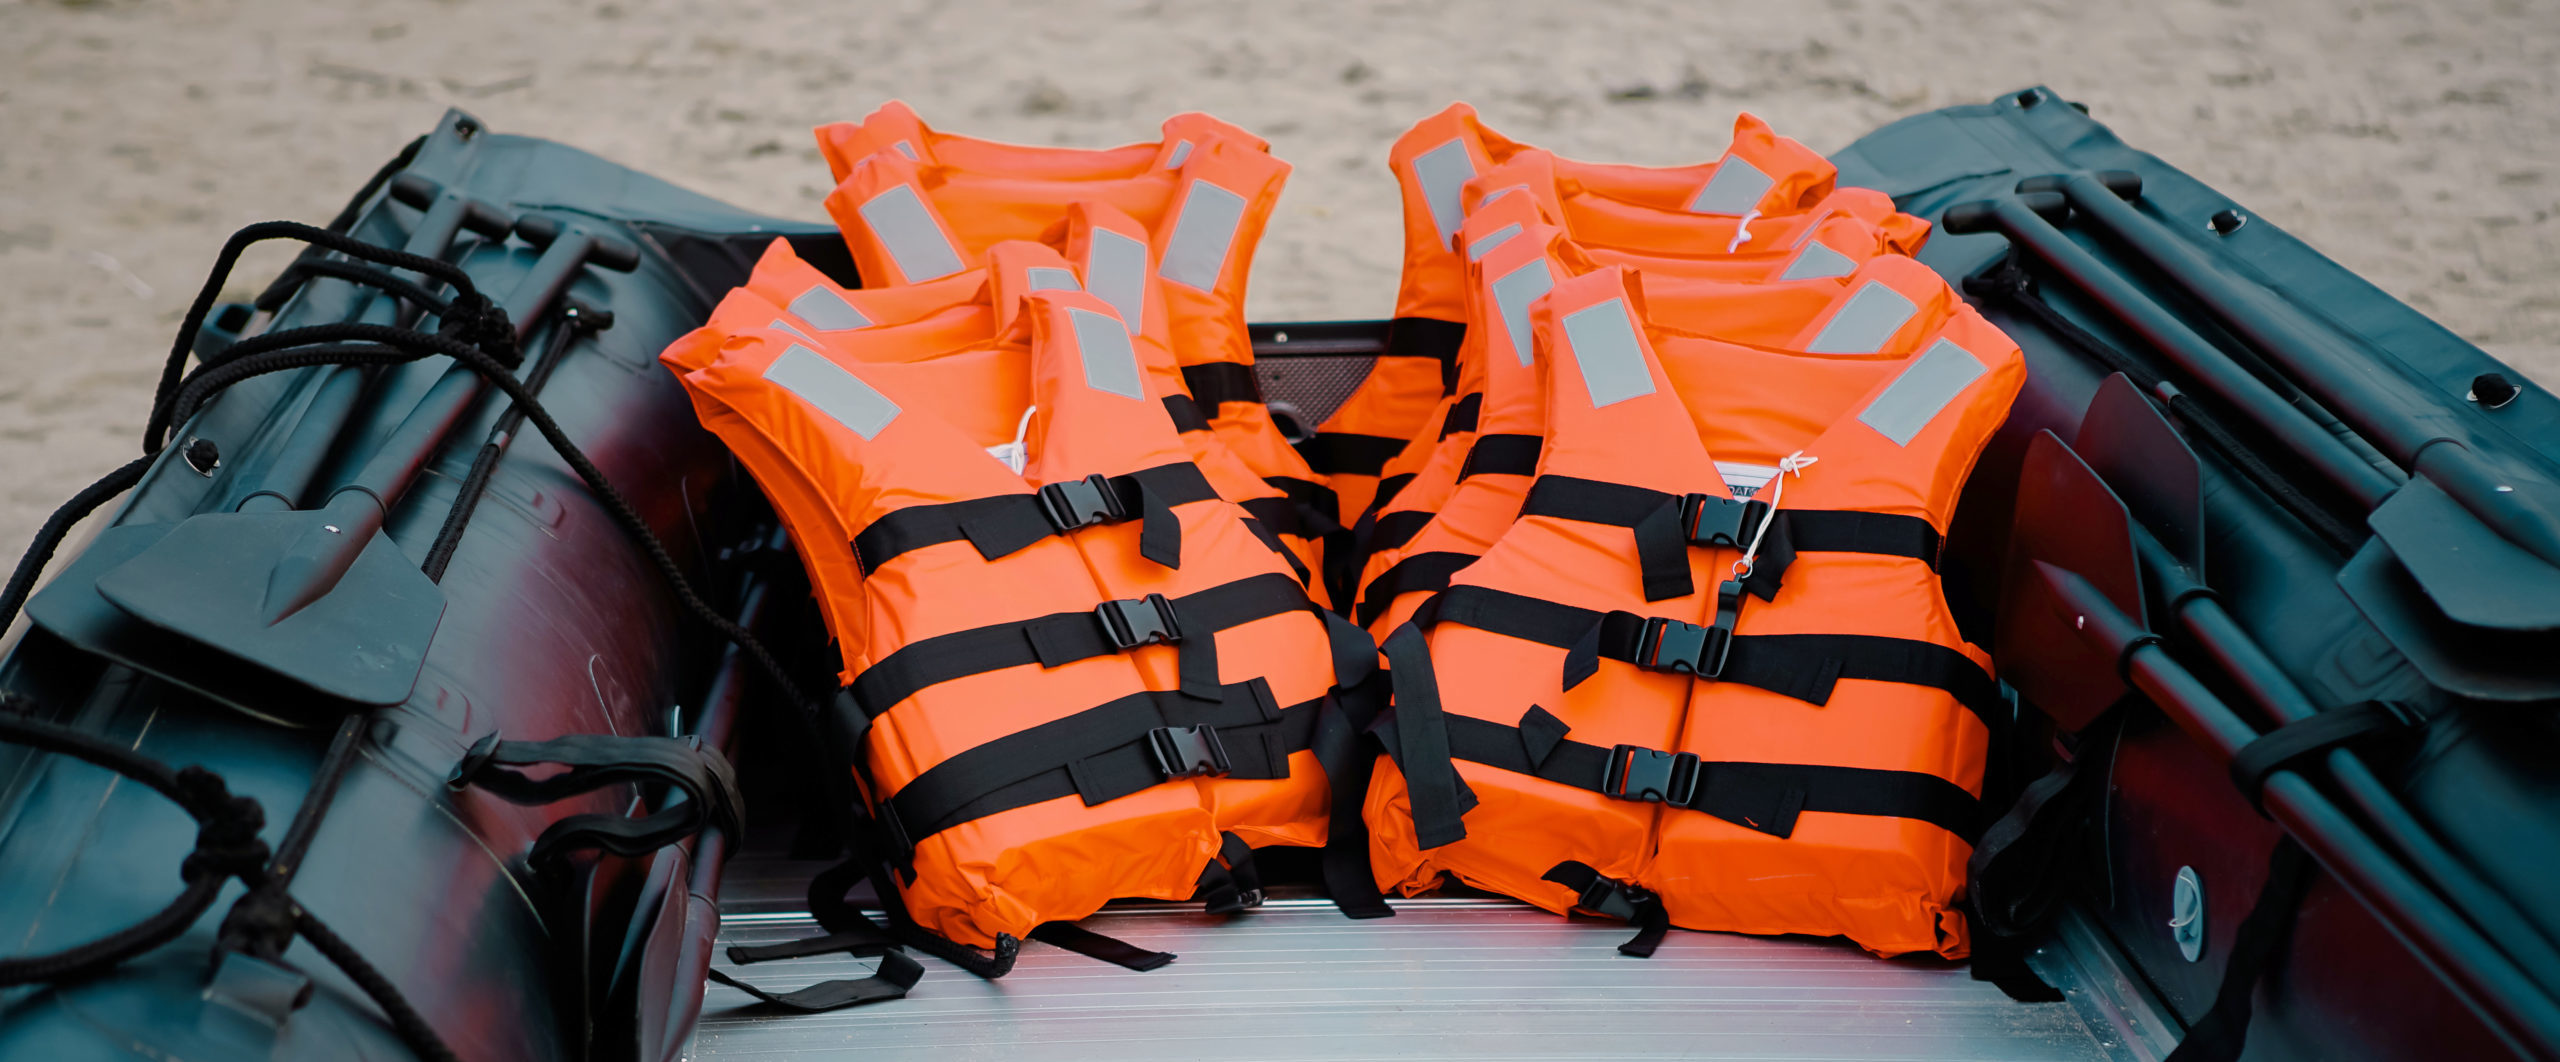 Life Jackets in Boat at Beach